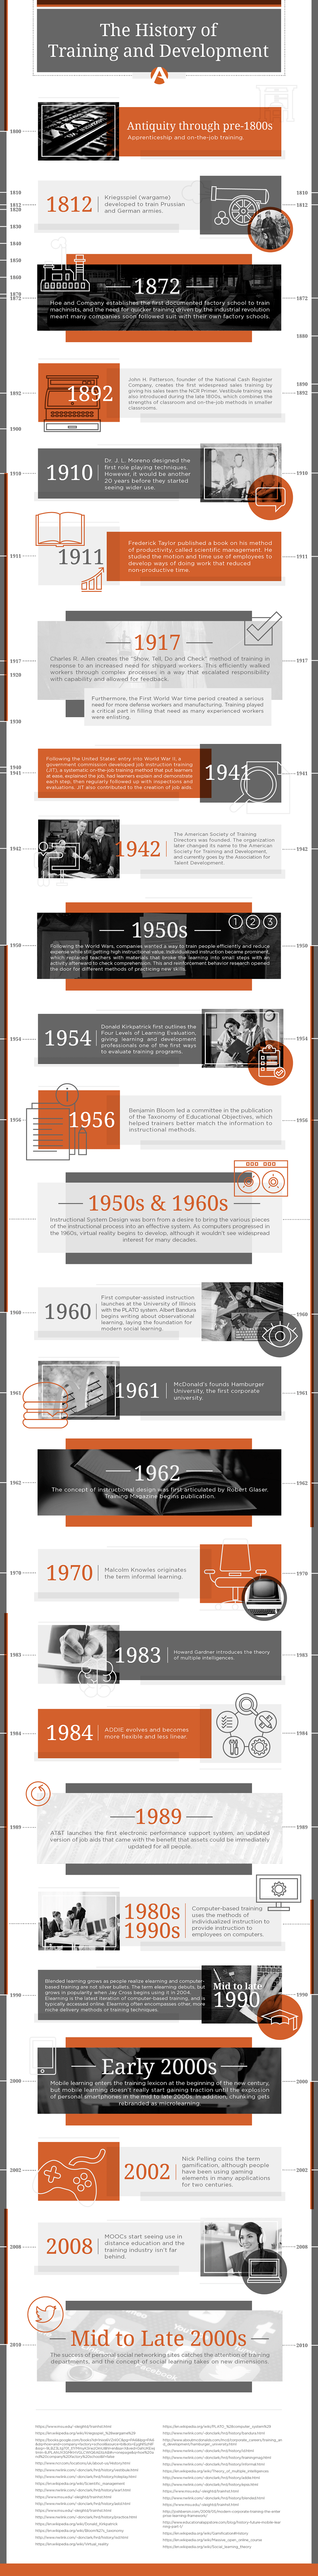 The History of Training and Development Infographic